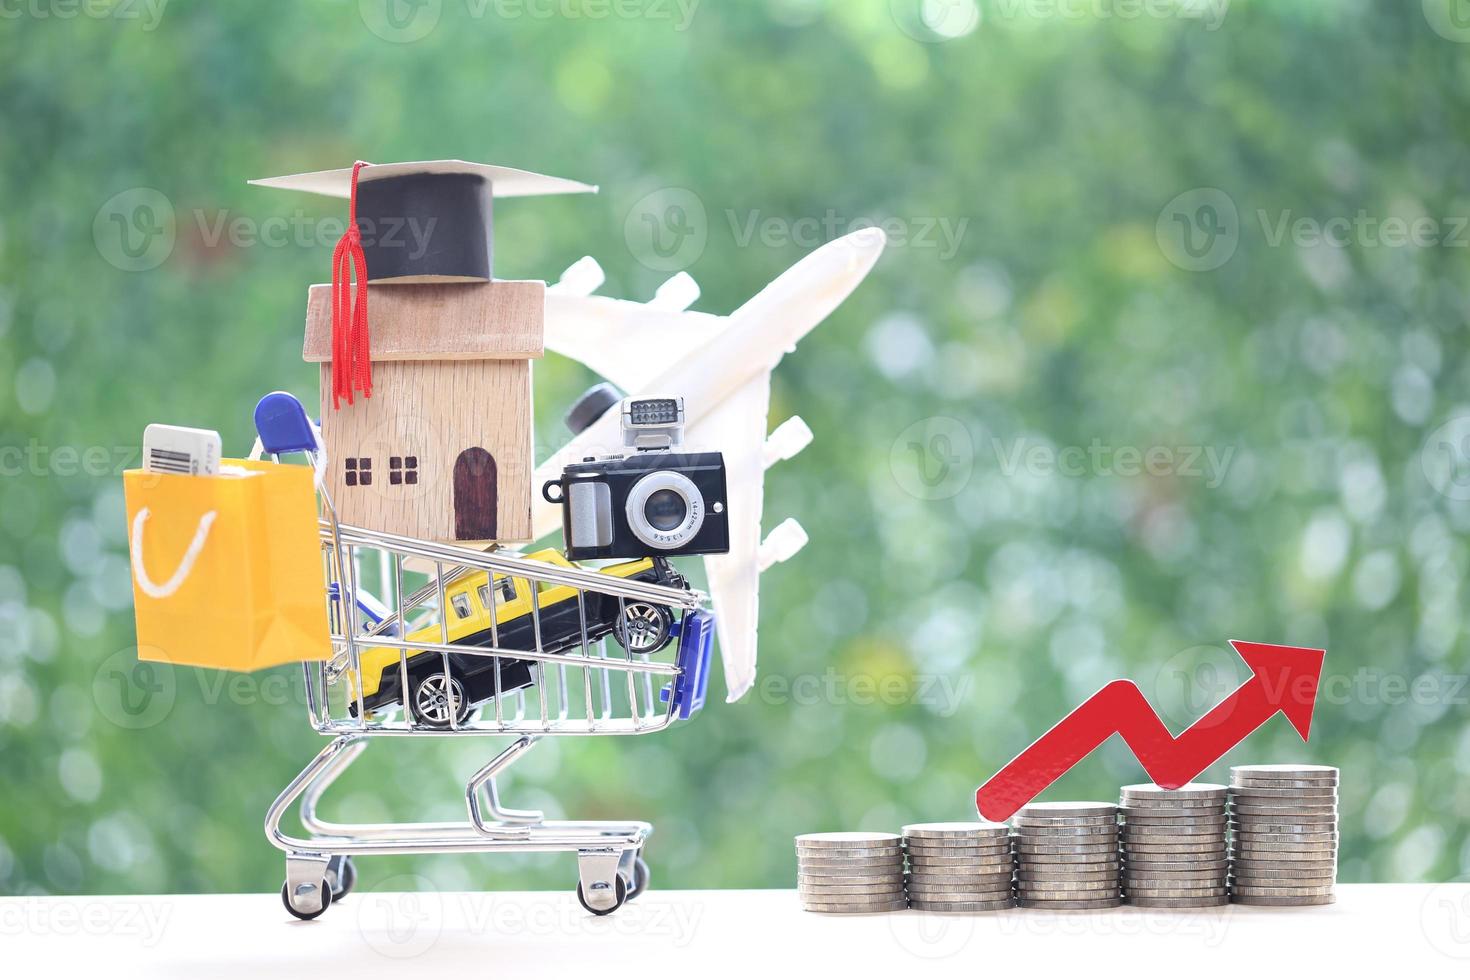 Inflation financial crisis concept, Model house or property on model miniature shopping cart and red arrow graph on natural green background photo